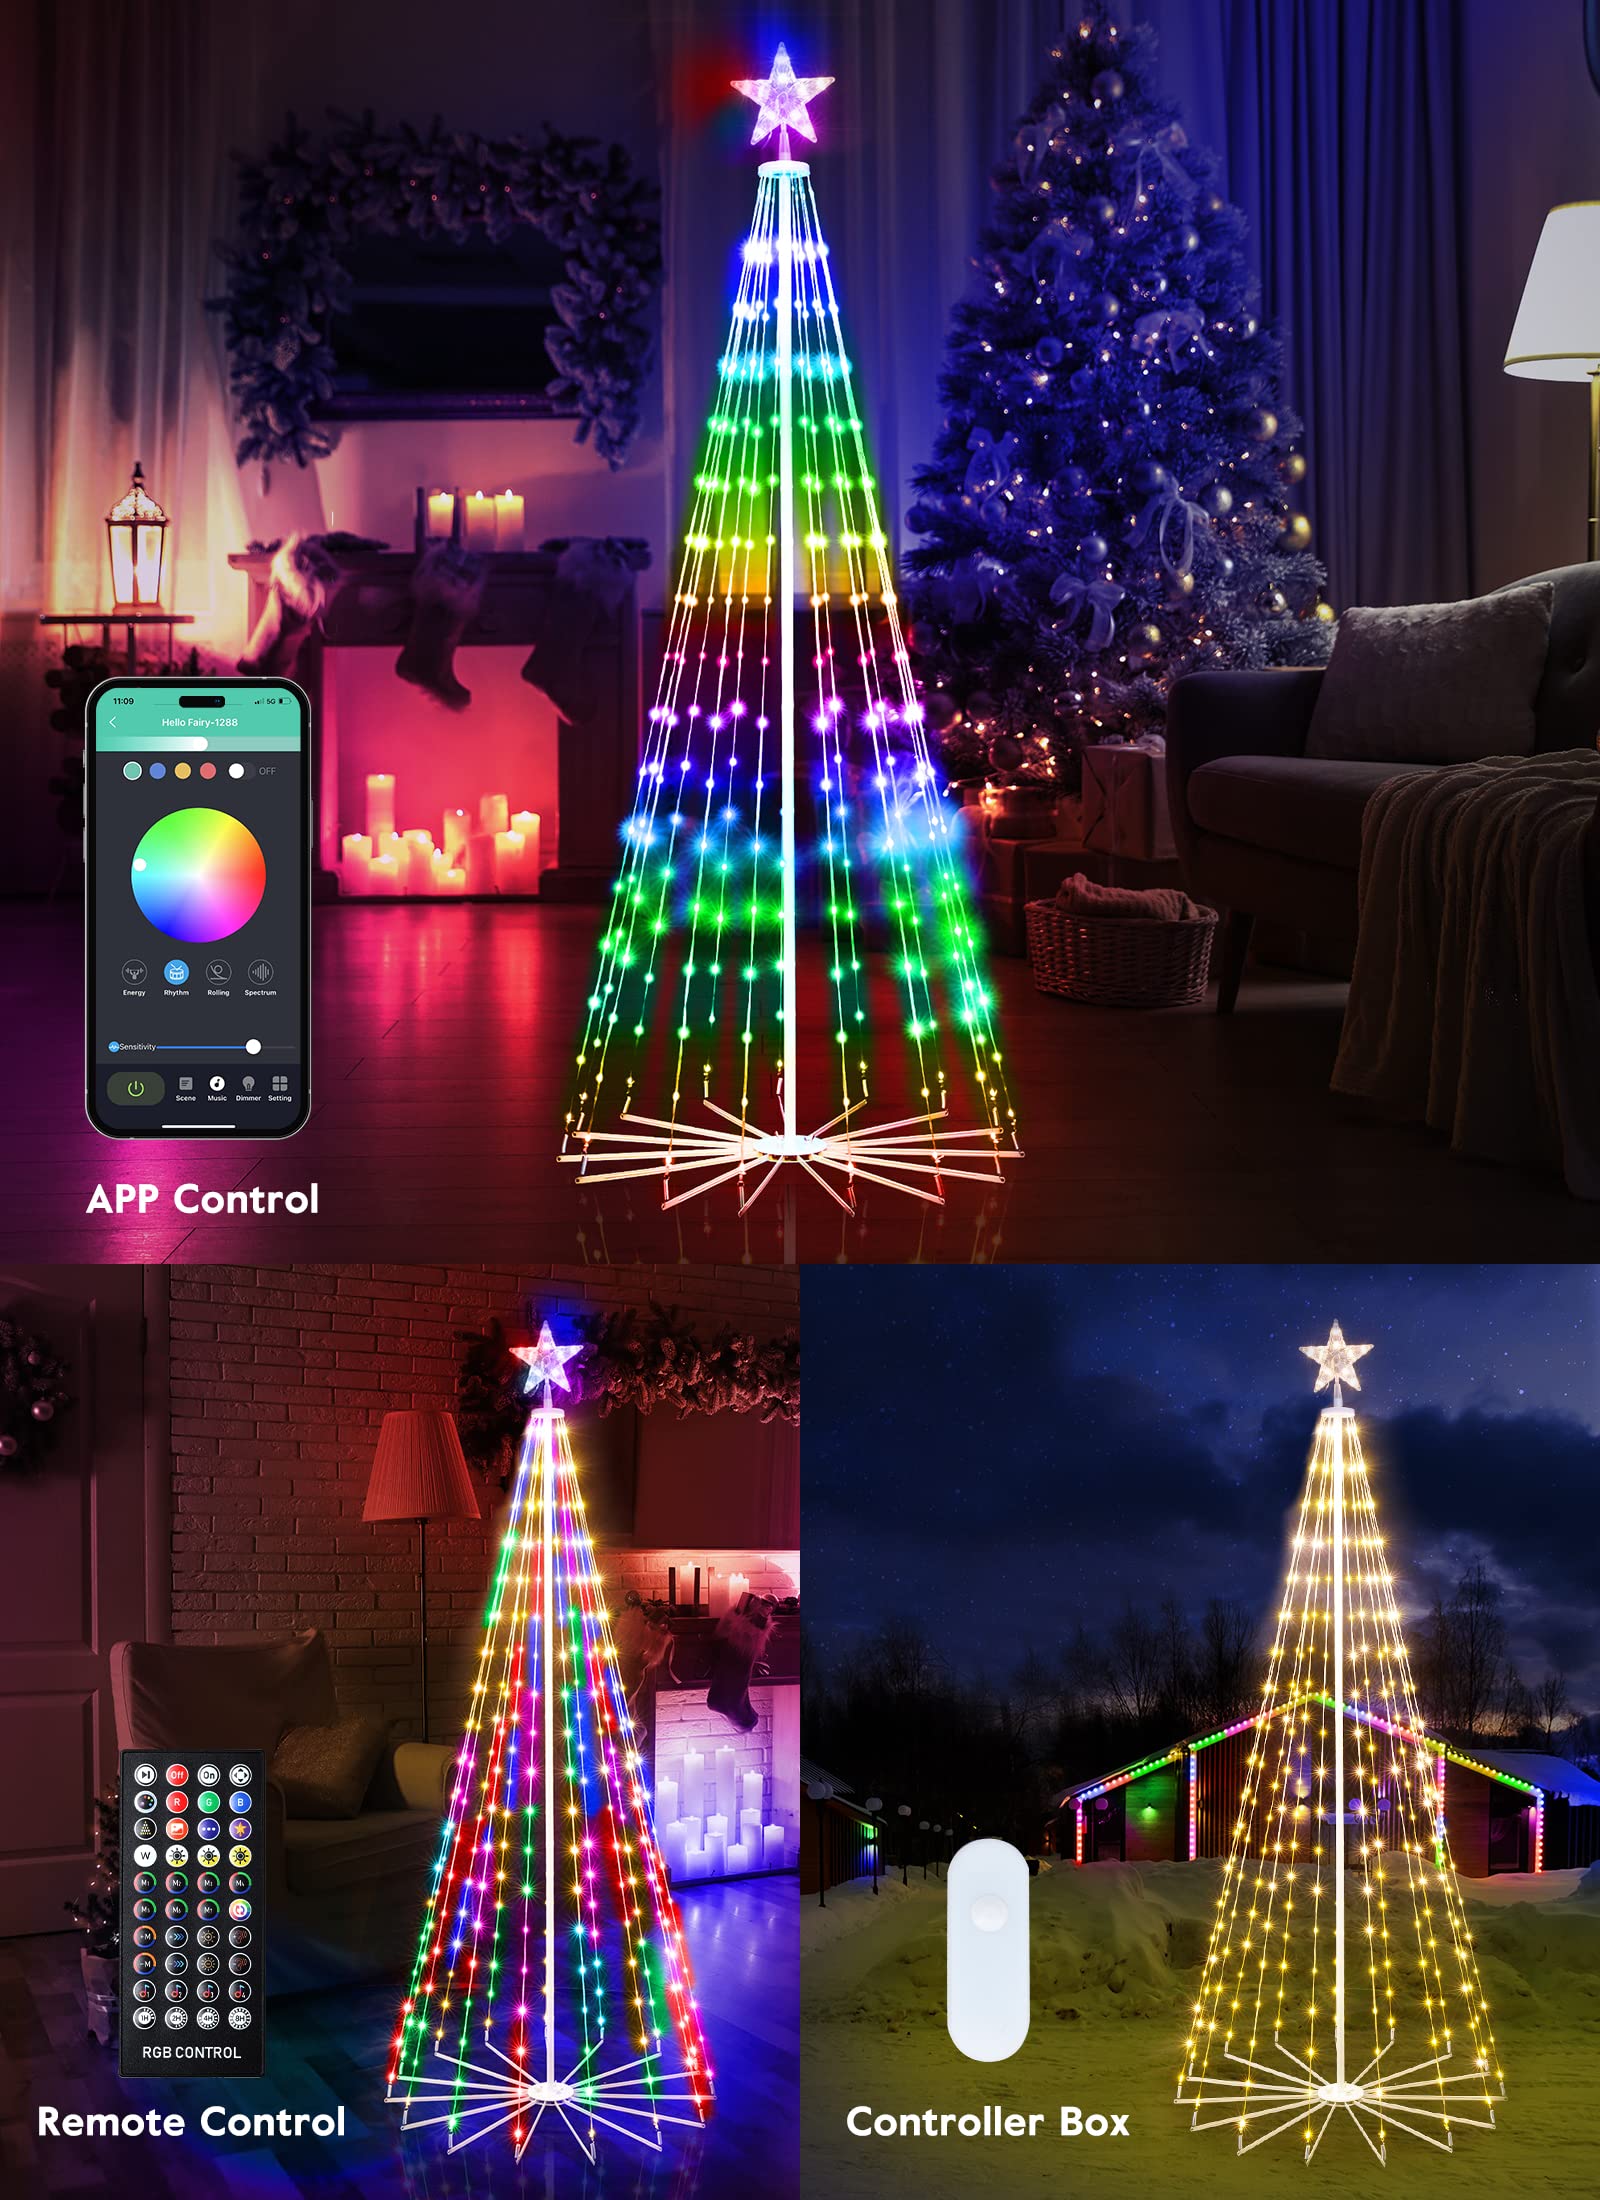 Christmas Smart Cone Tree Light with Star Topper, Remote & APP Control, 16 Colors, 34 Modes